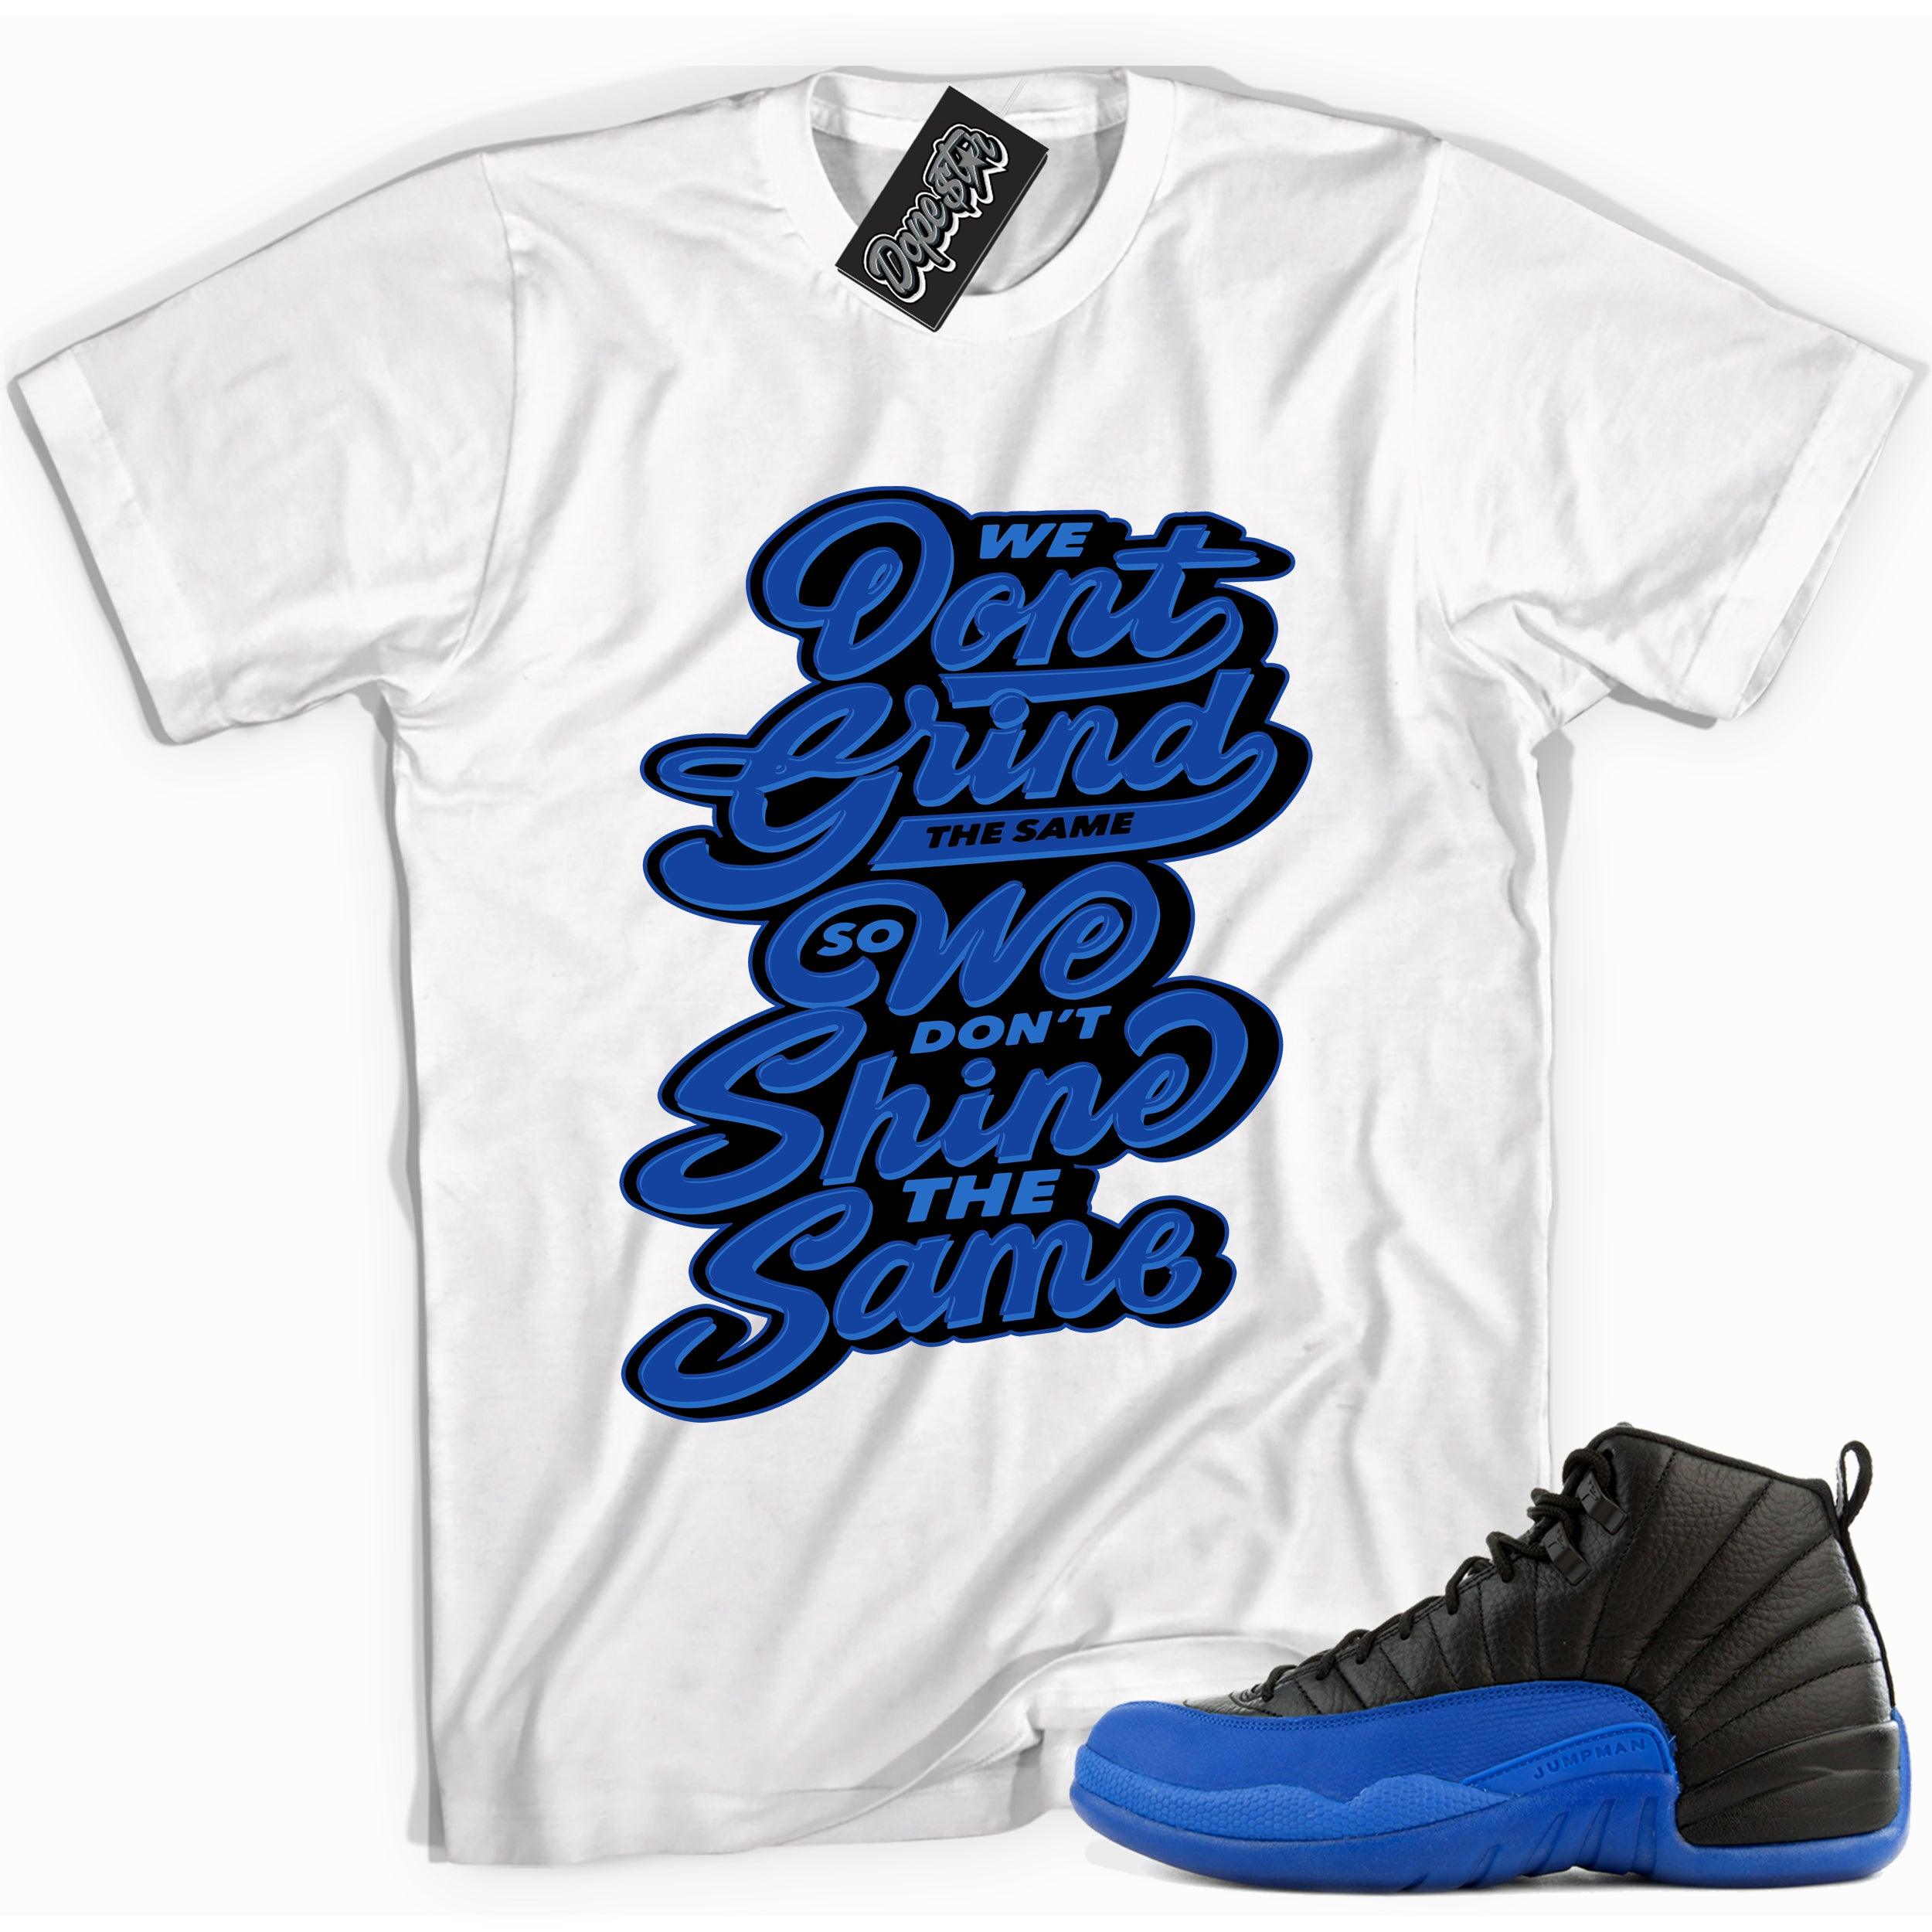 Cool white graphic tee with 'we don't grind the same' print, that perfectly matches Air Jordan 12 Retro Black Game Royal sneakers.